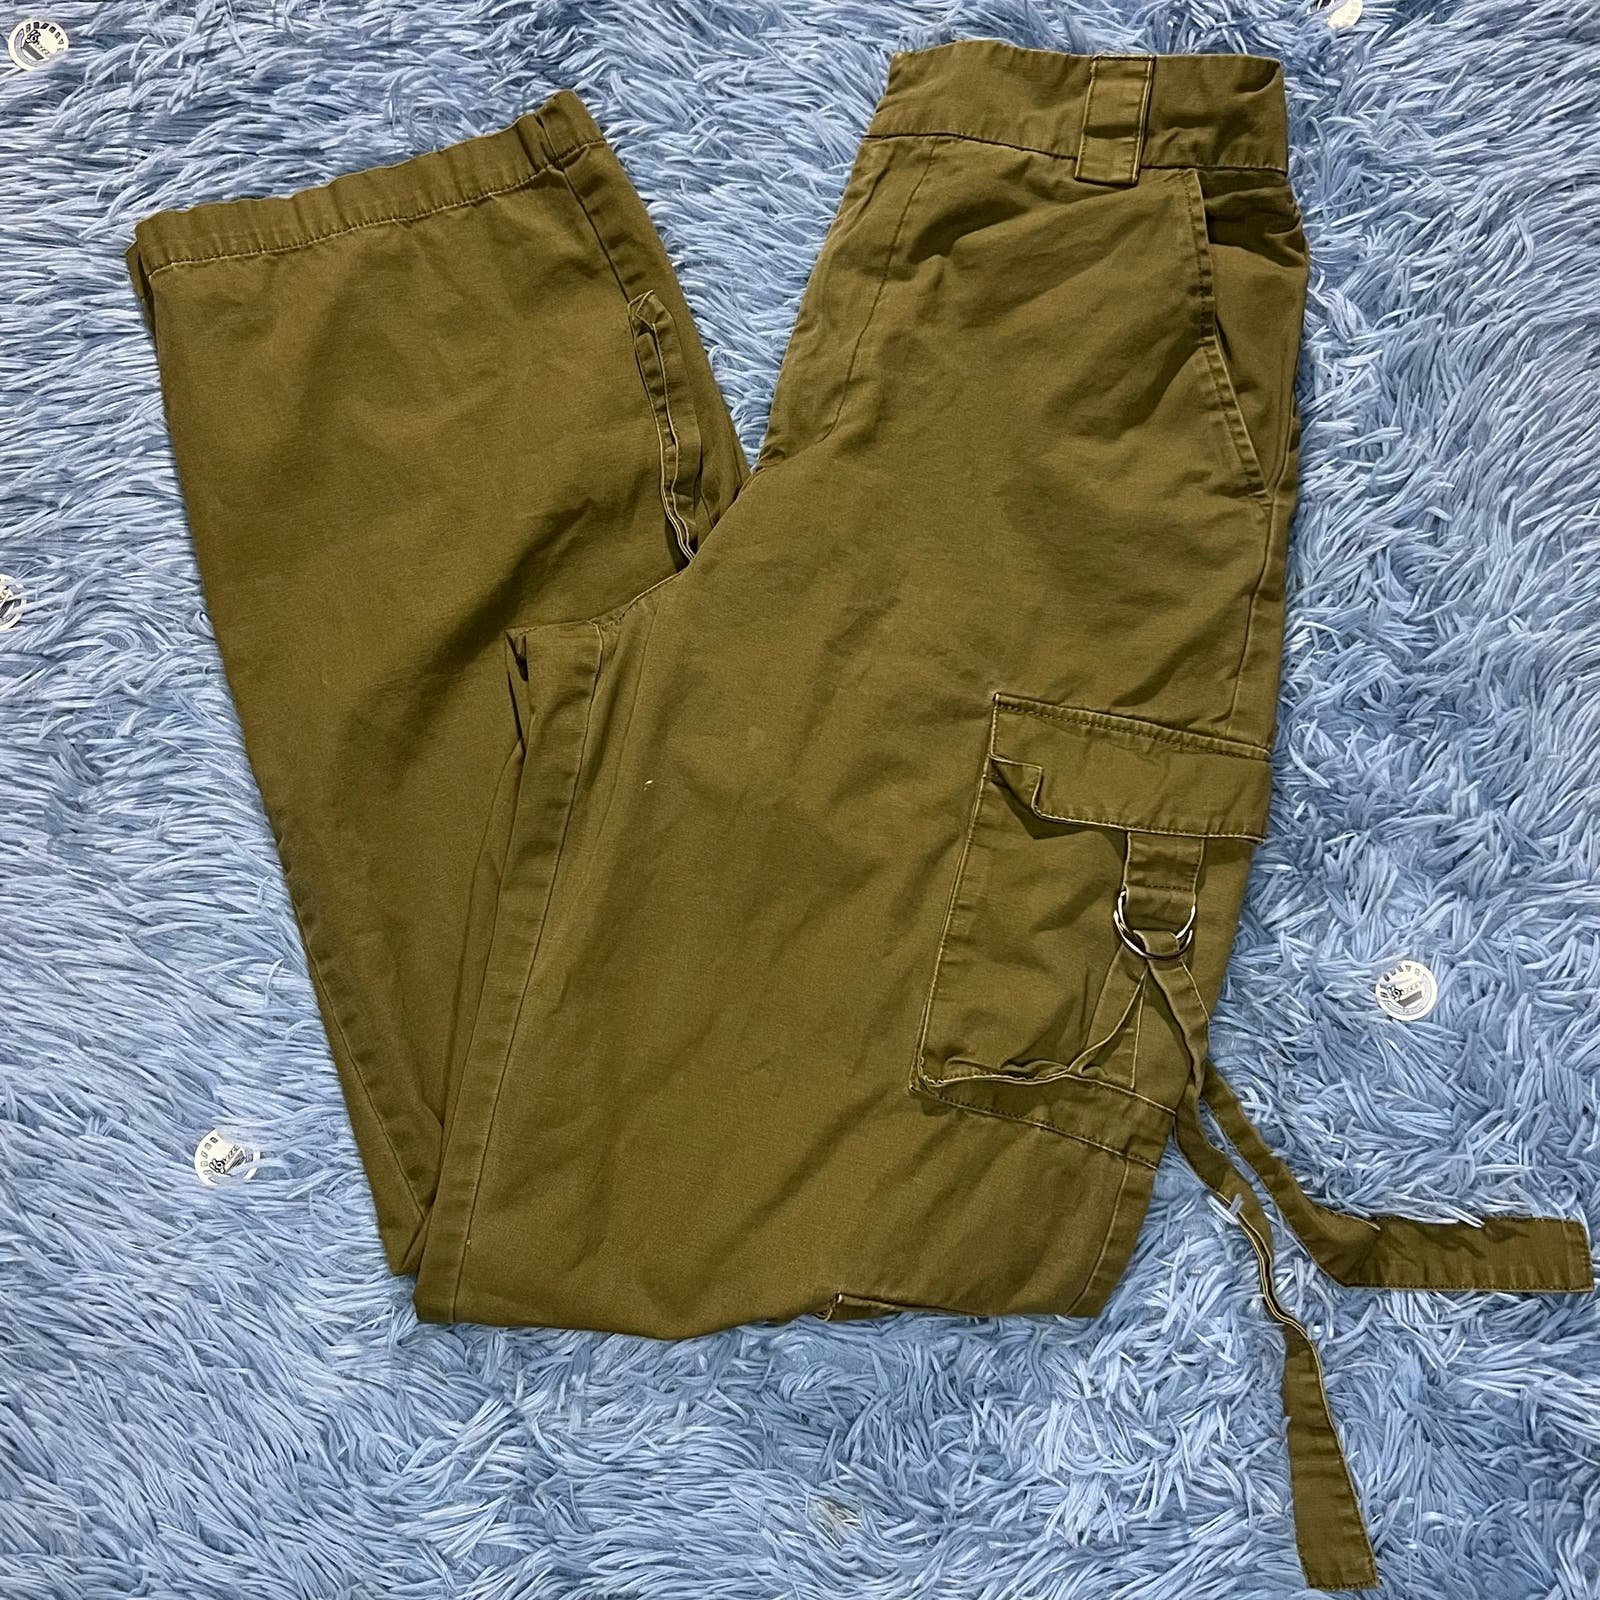 Authentic Forever 21 Cargo Pants Size Medium Women’s Army Green Outdoor lbspuXbD1 High Quaity